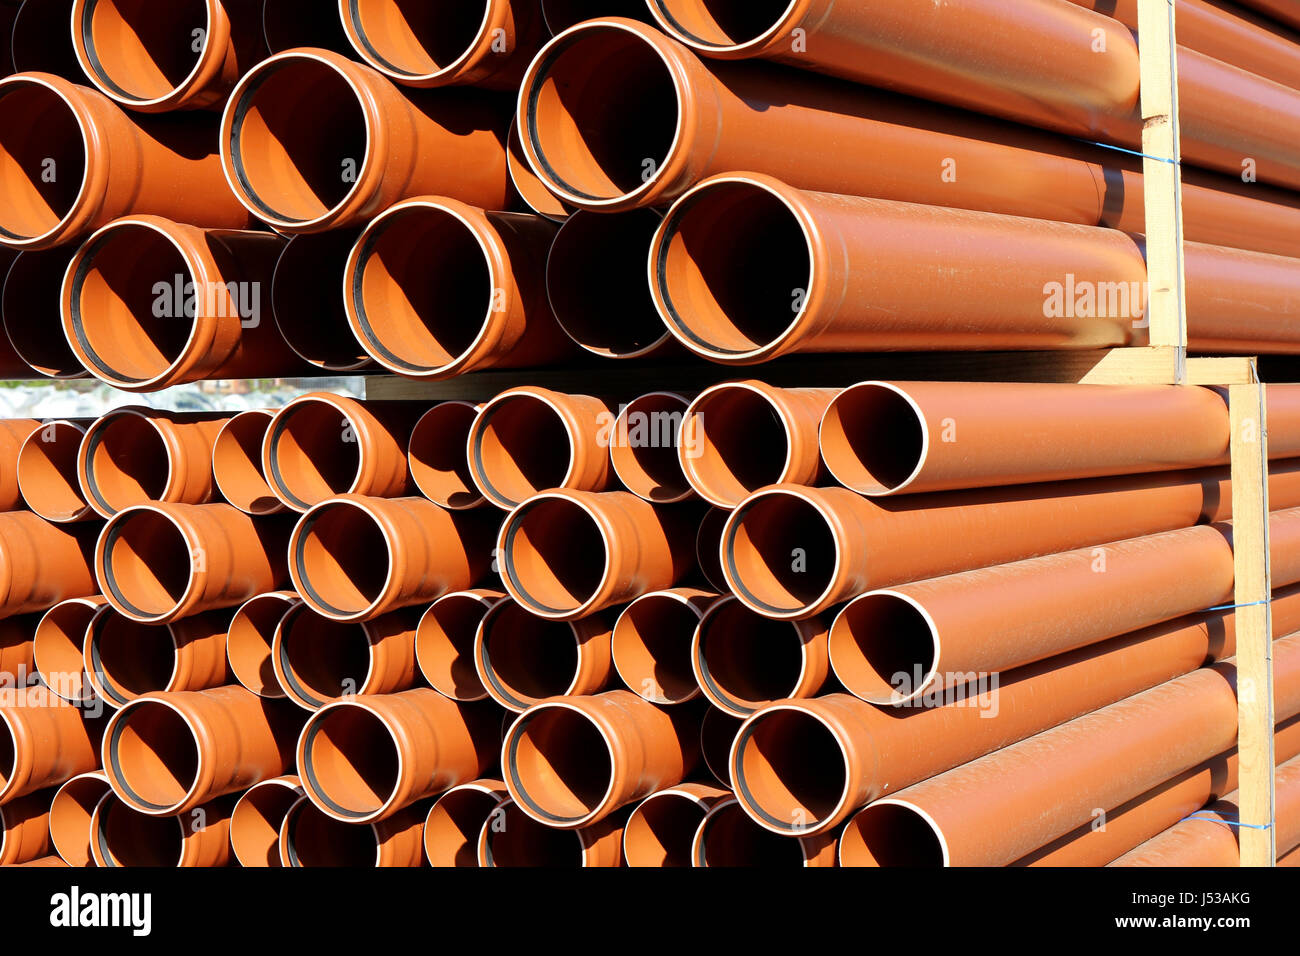 pallet of sewer pipes Stock Photo